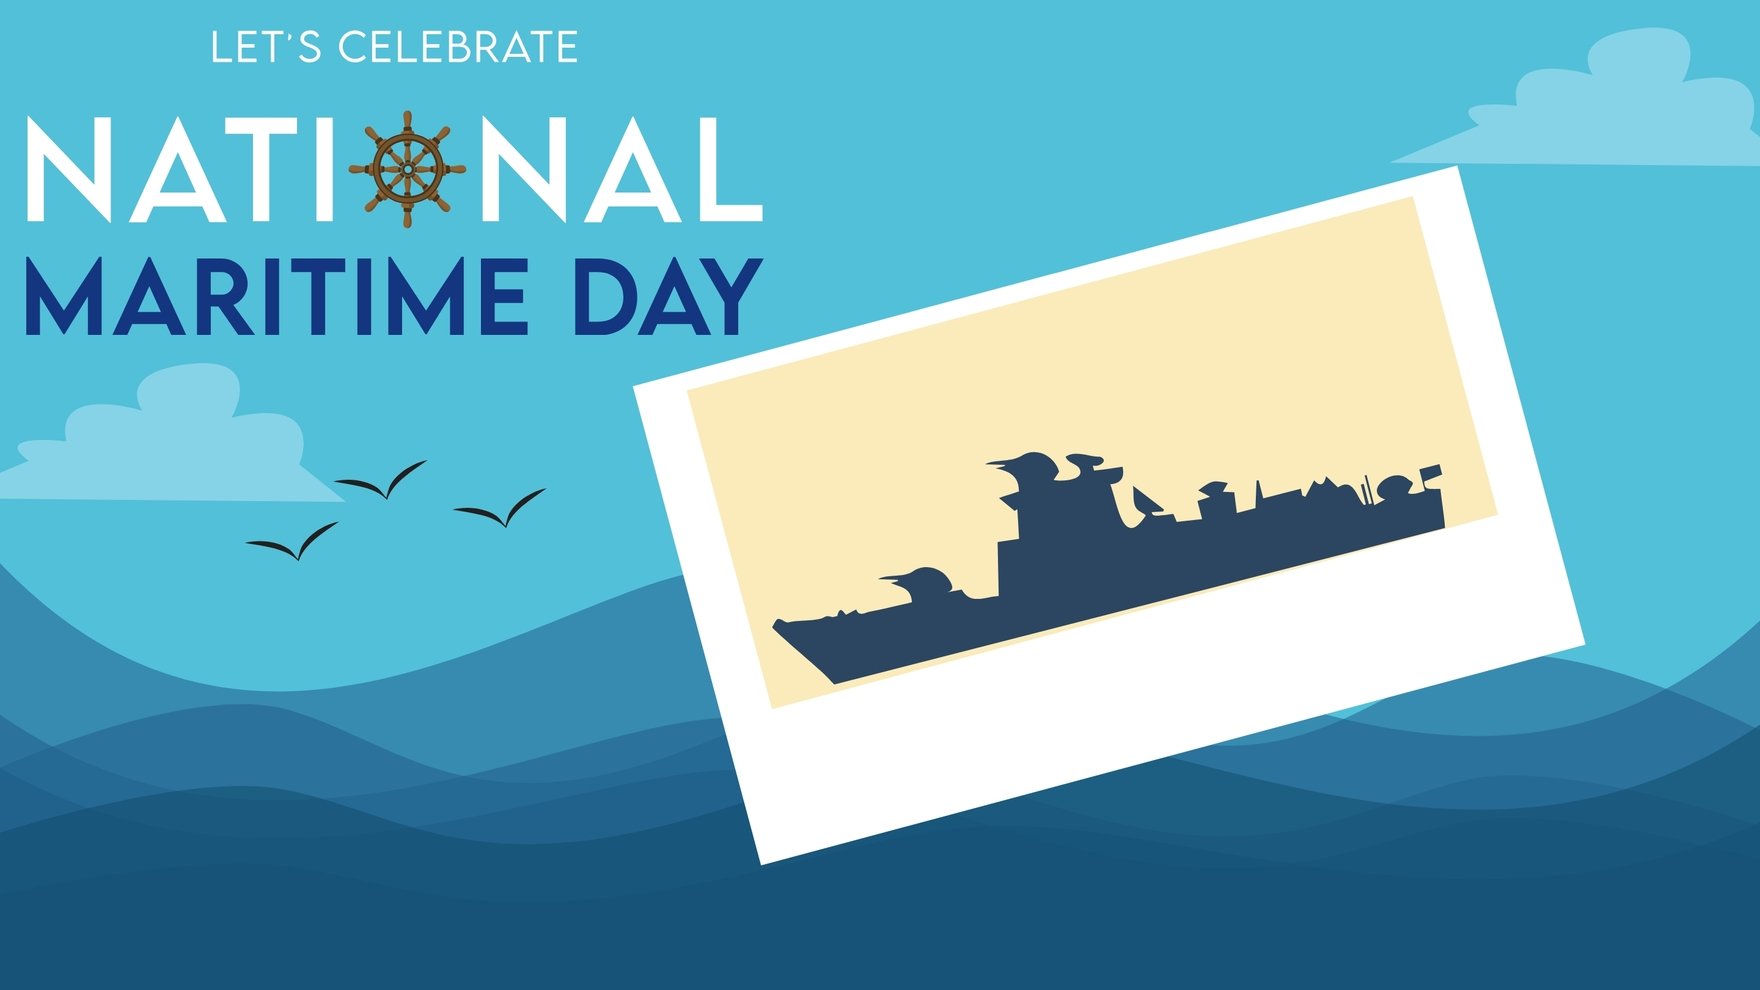 Free National Maritime Day Photo Background in PDF, Illustrator, PSD, EPS, SVG, JPG, PNG